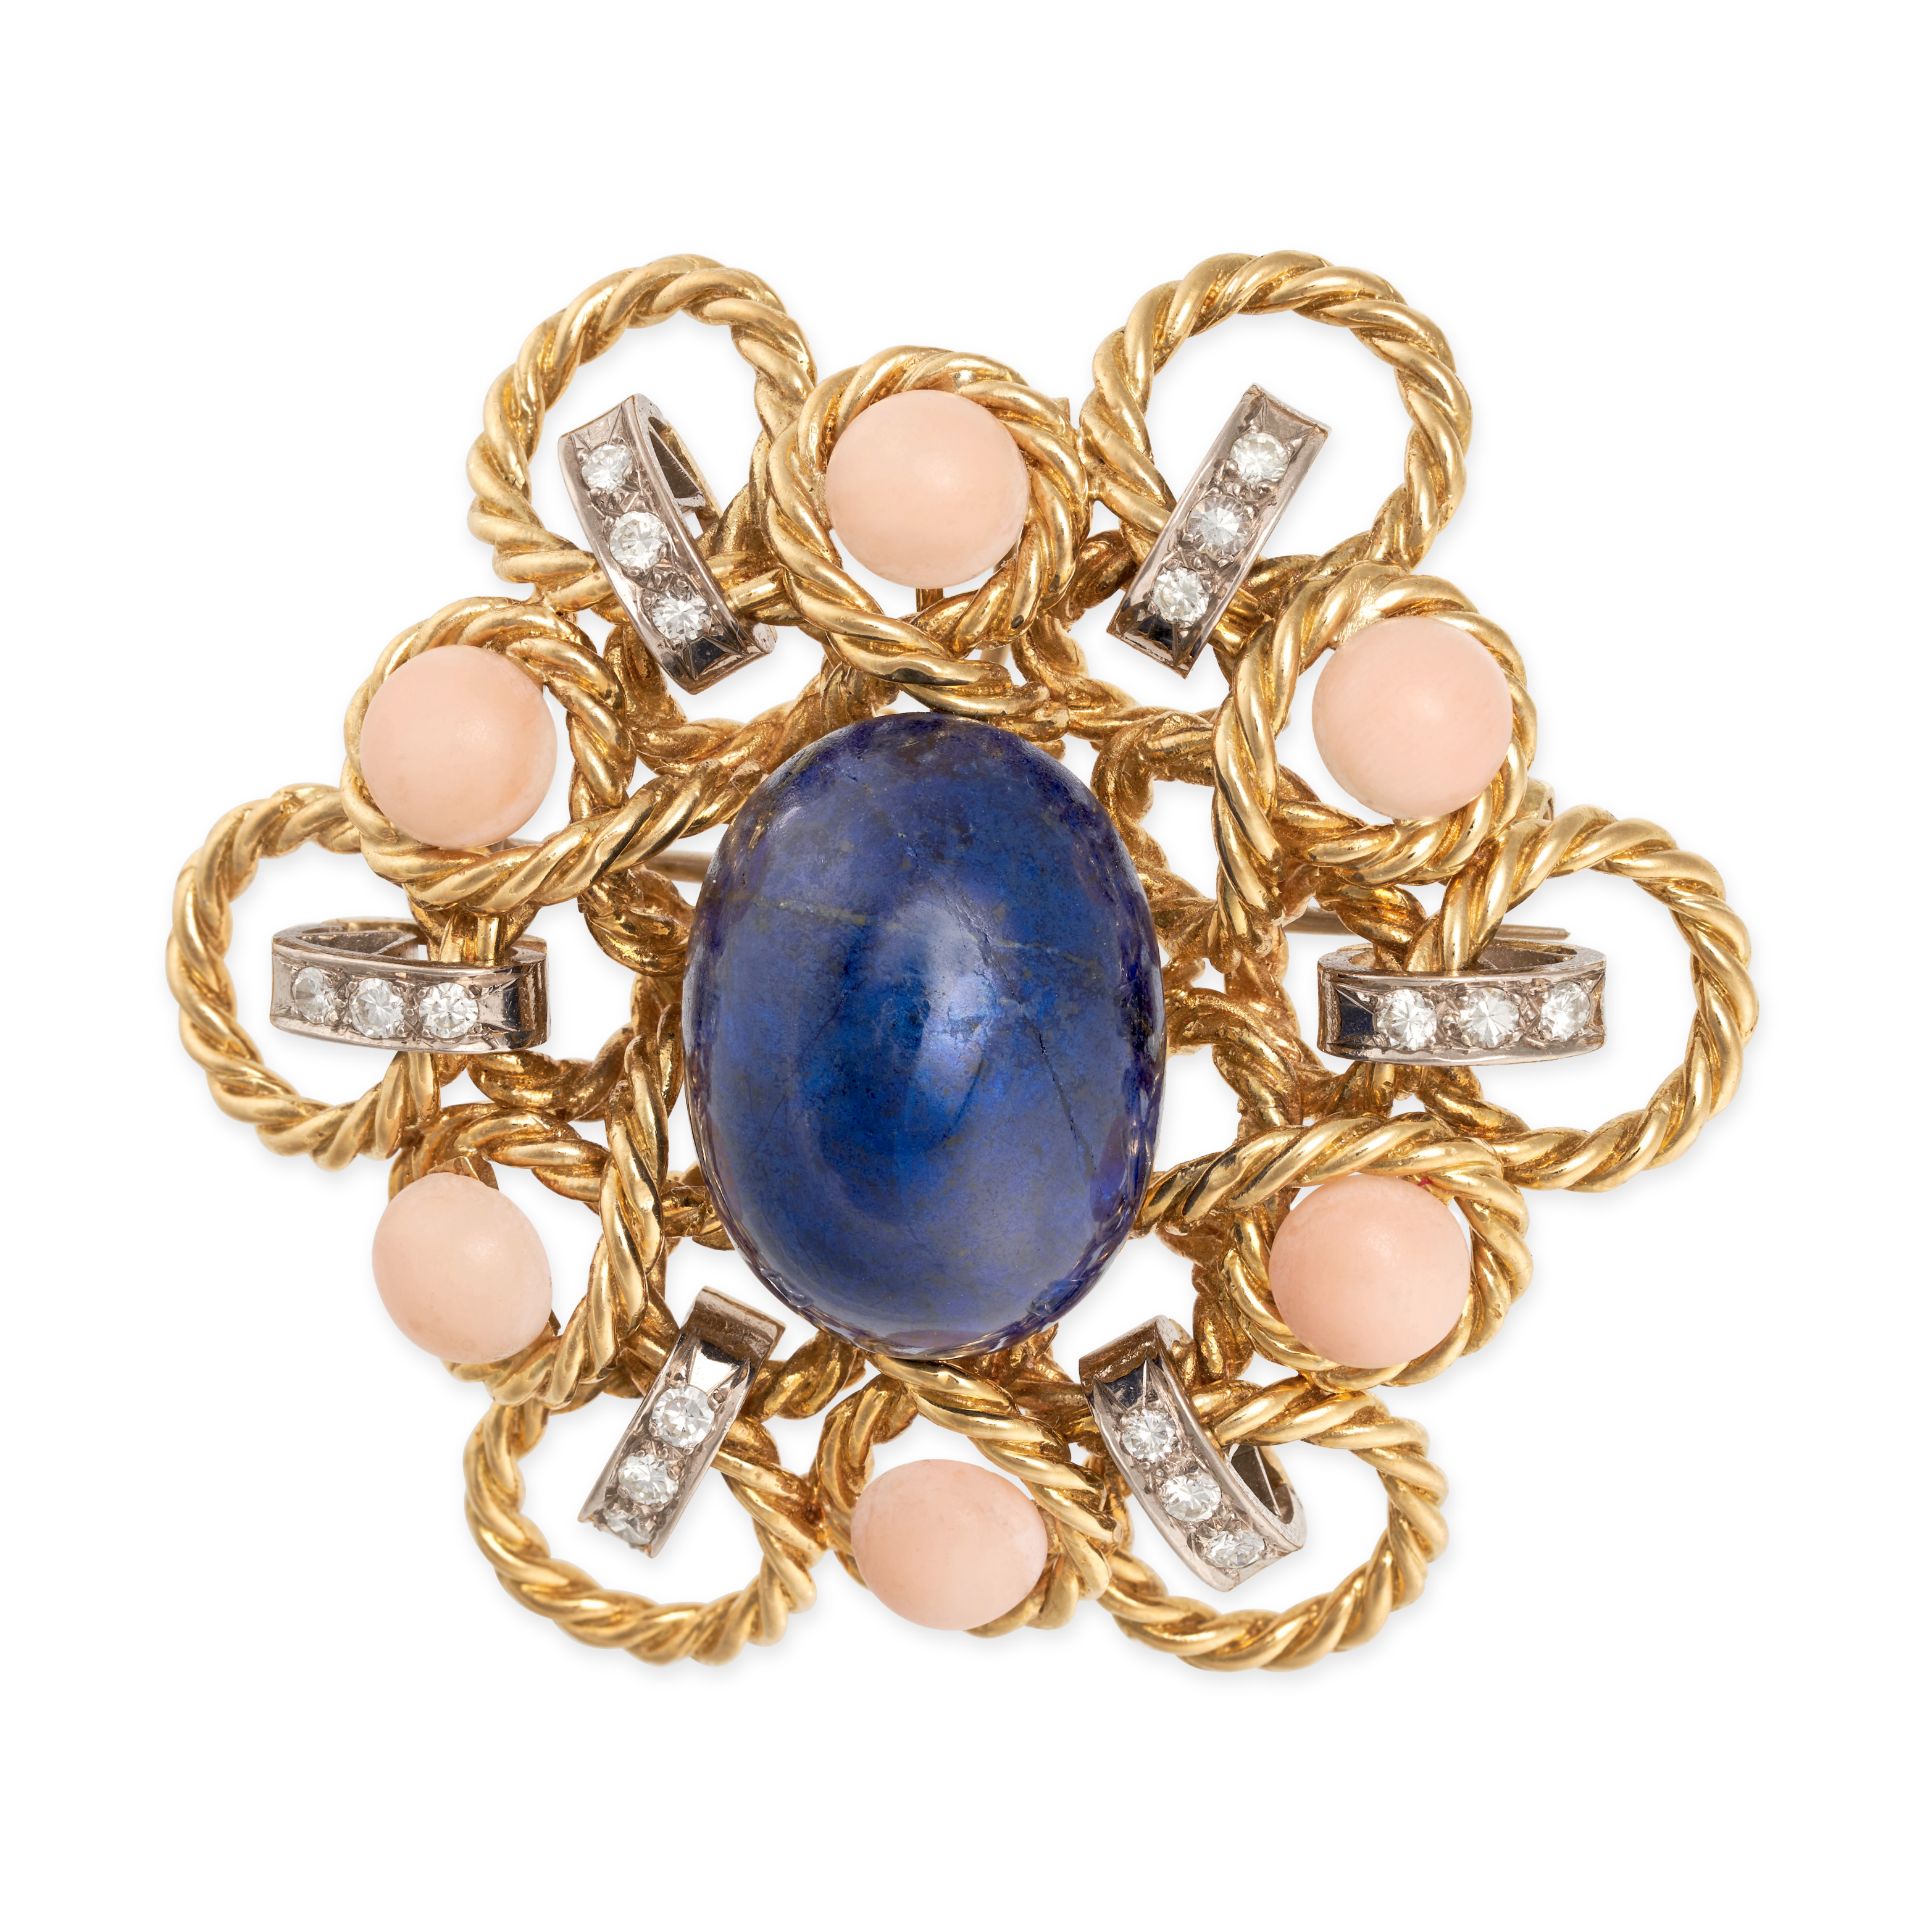 A VINTAGE LAPIS LAZULI, CORAL AND DIAMOND BROOCH / PENDANT in yellow gold, set with a cabochon la...